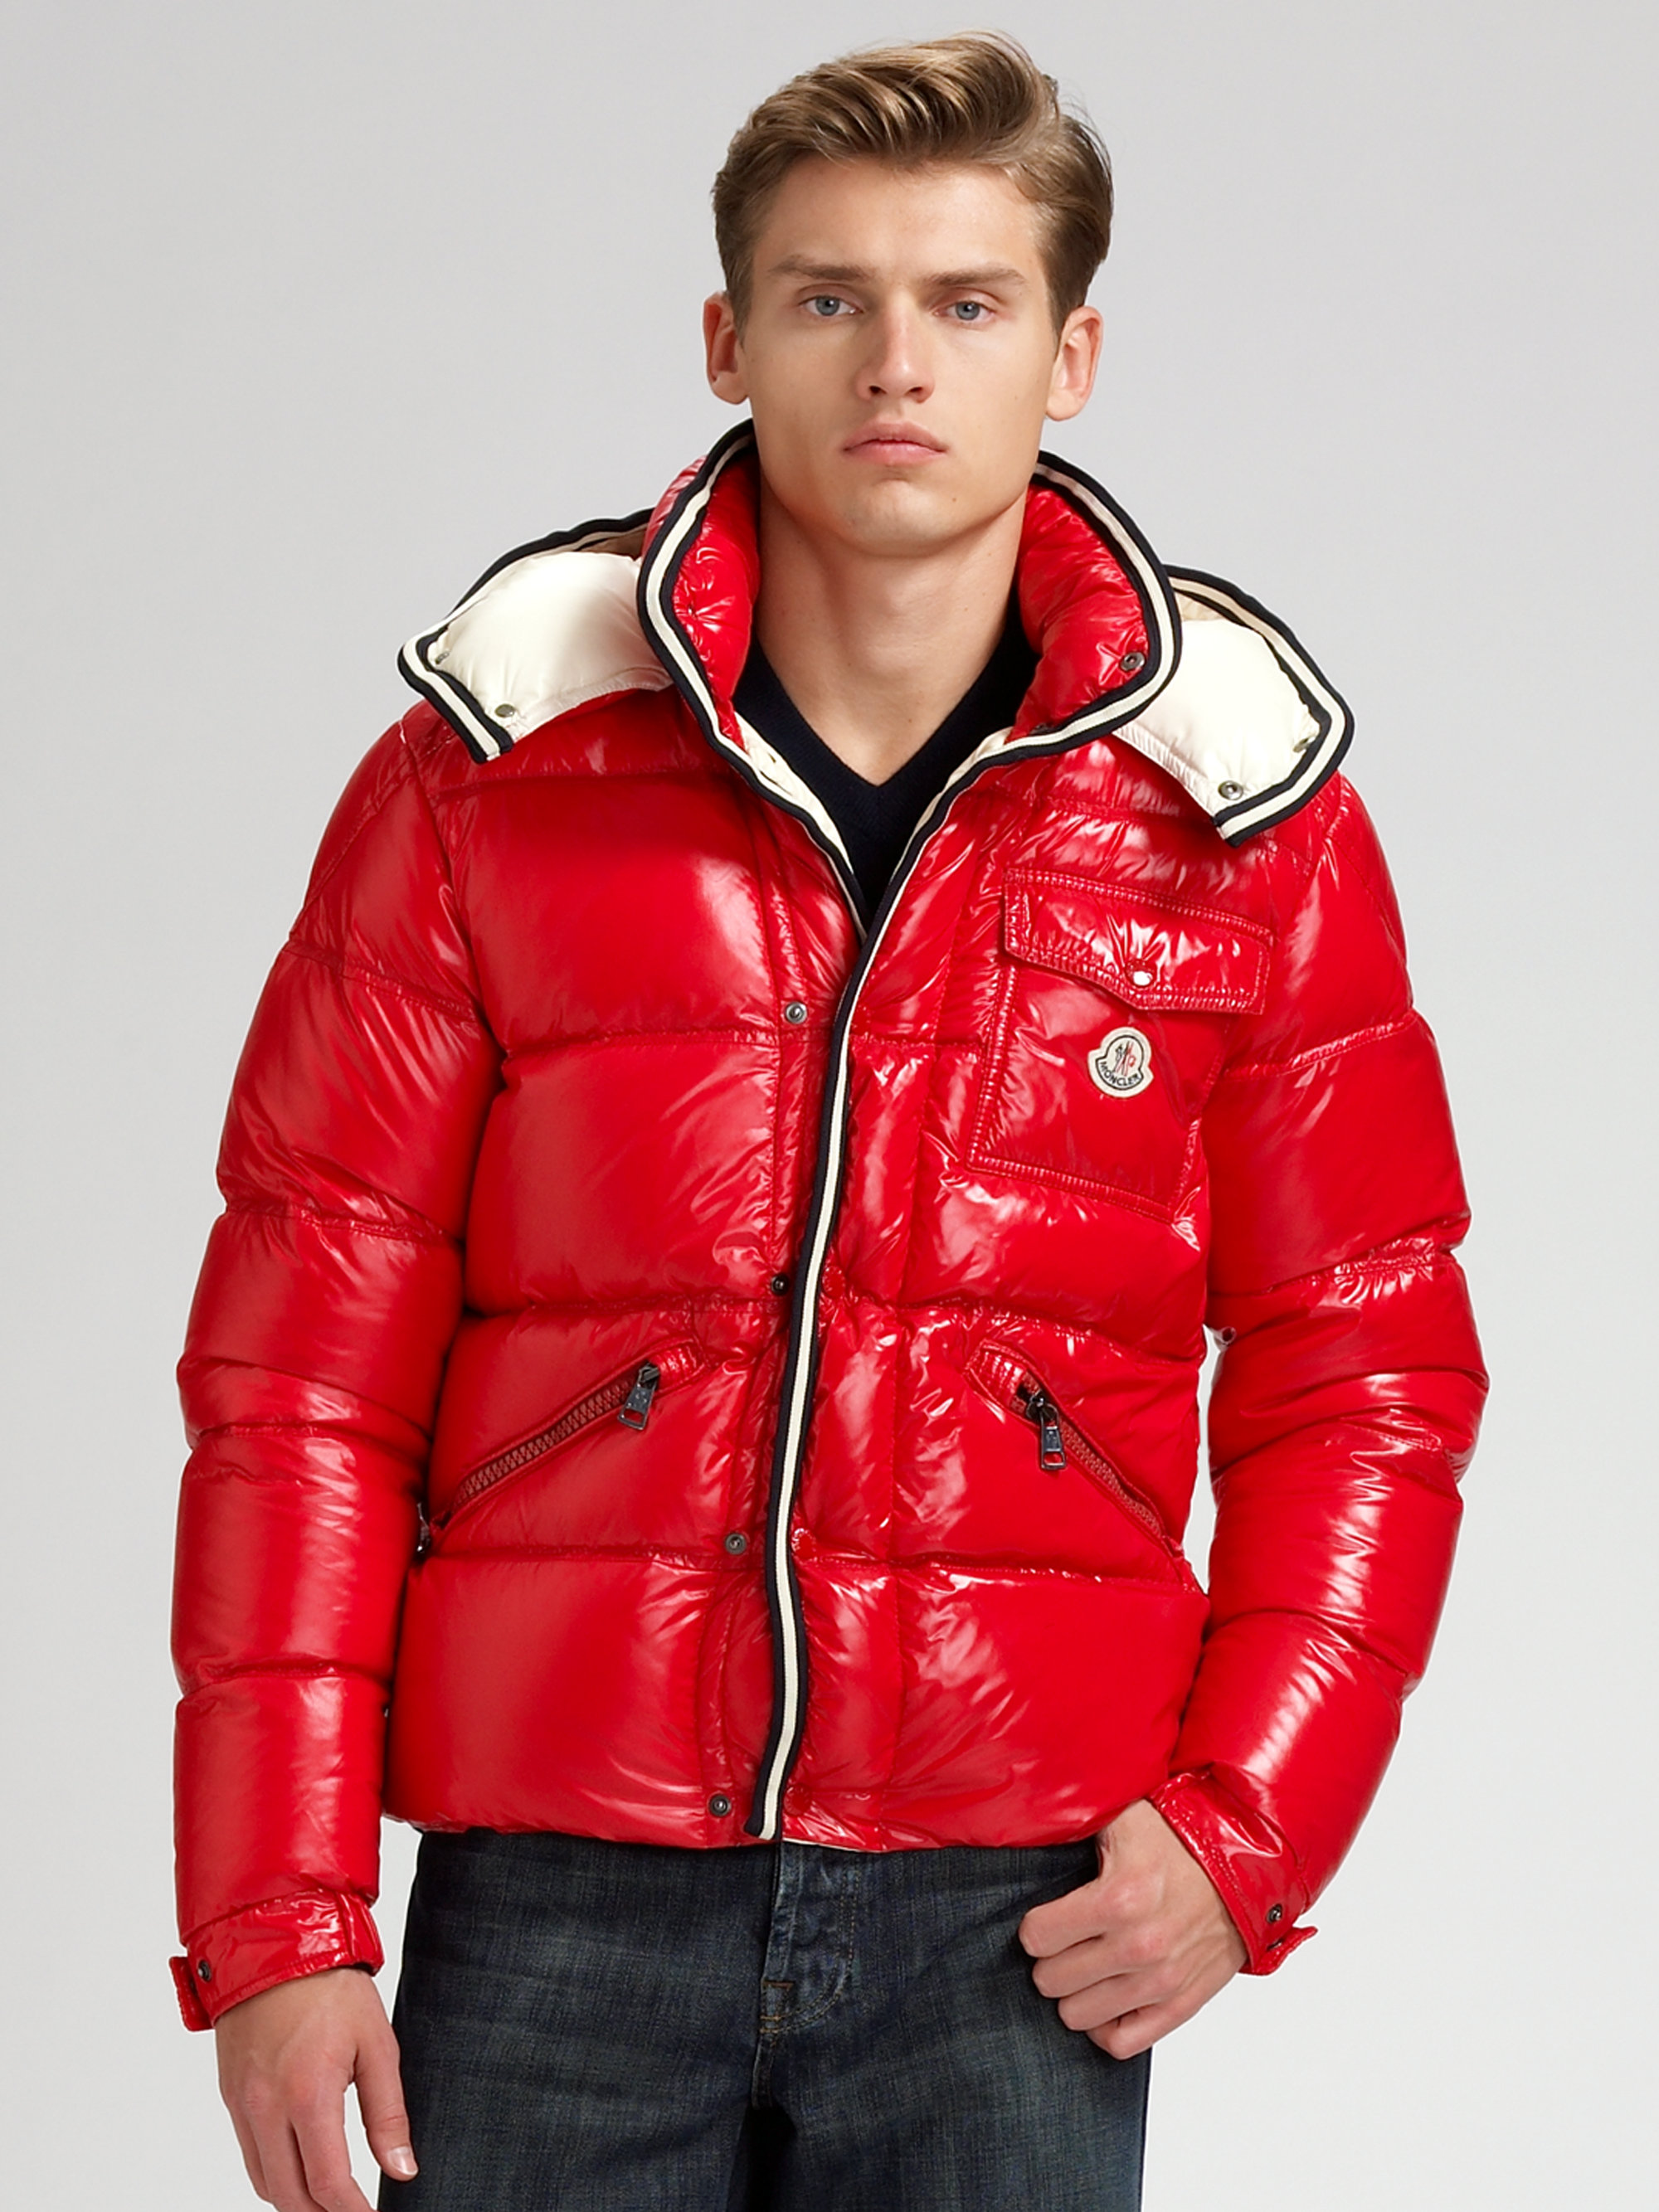 moncler branson coat OFF 58% - Online Shopping Site for Fashion & Lifestyle.